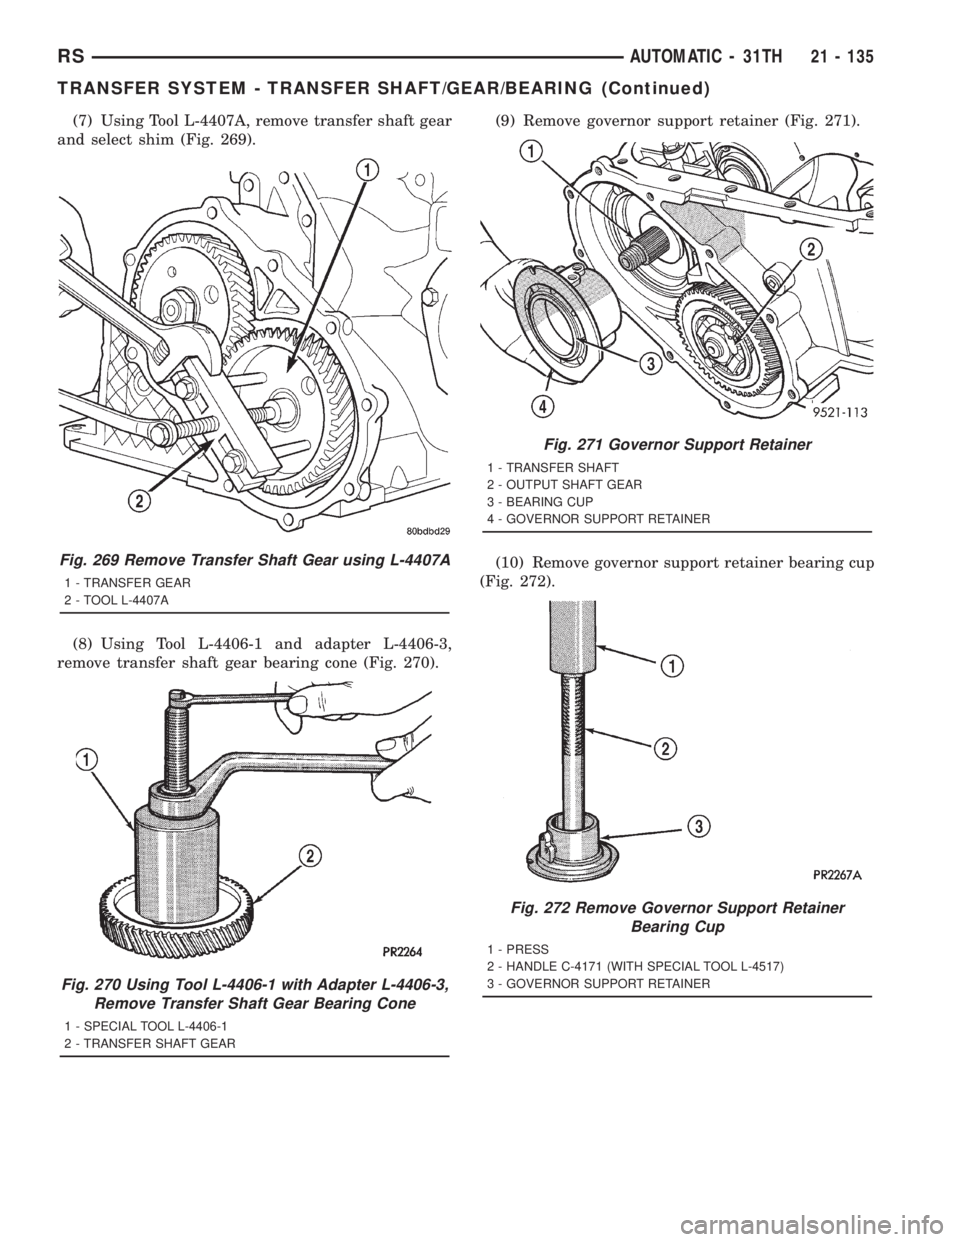 CHRYSLER VOYAGER 2001  Service Manual (7) Using Tool L-4407A, remove transfer shaft gear
and select shim (Fig. 269).
(8) Using Tool L-4406-1 and adapter L-4406-3,
remove transfer shaft gear bearing cone (Fig. 270).(9) Remove governor supp